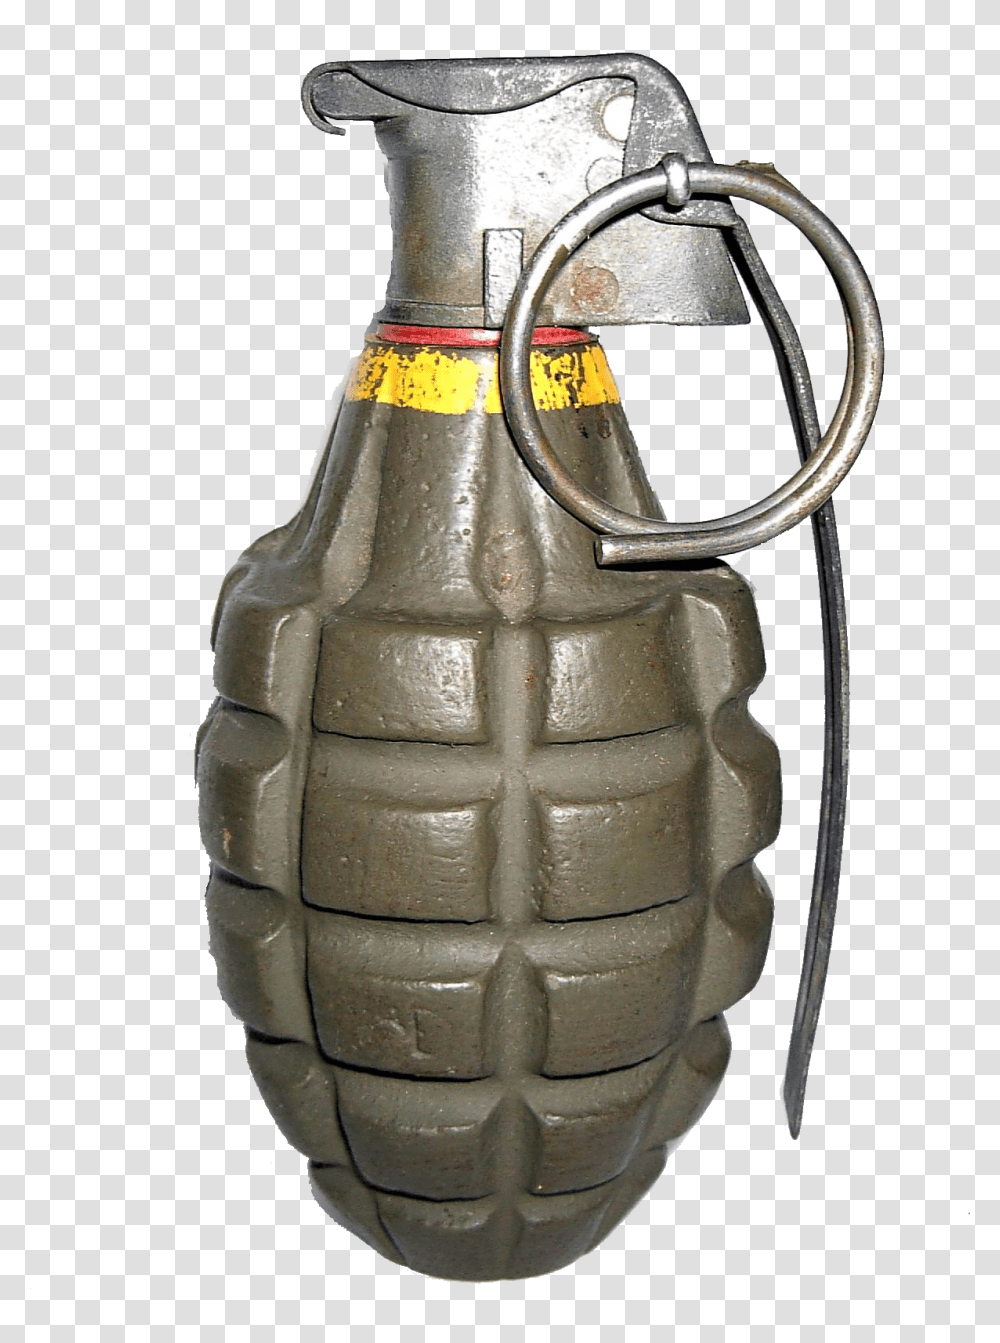 Hand Grenade Image Grenade, Bomb, Weapon, Weaponry Transparent Png